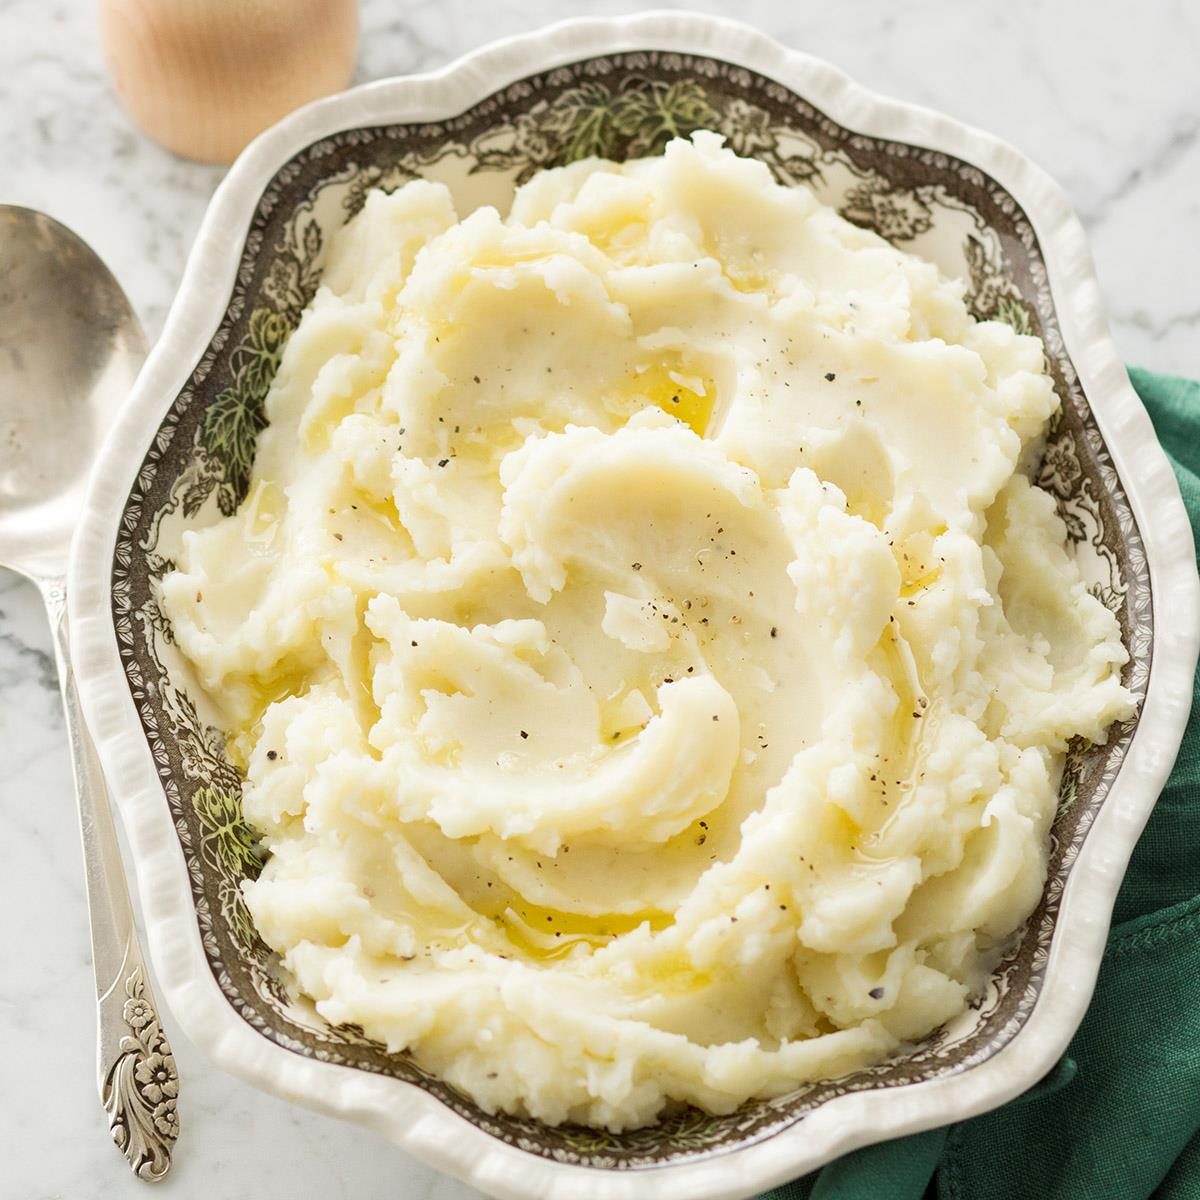 Large white plate filled with buttery mashed potatoes